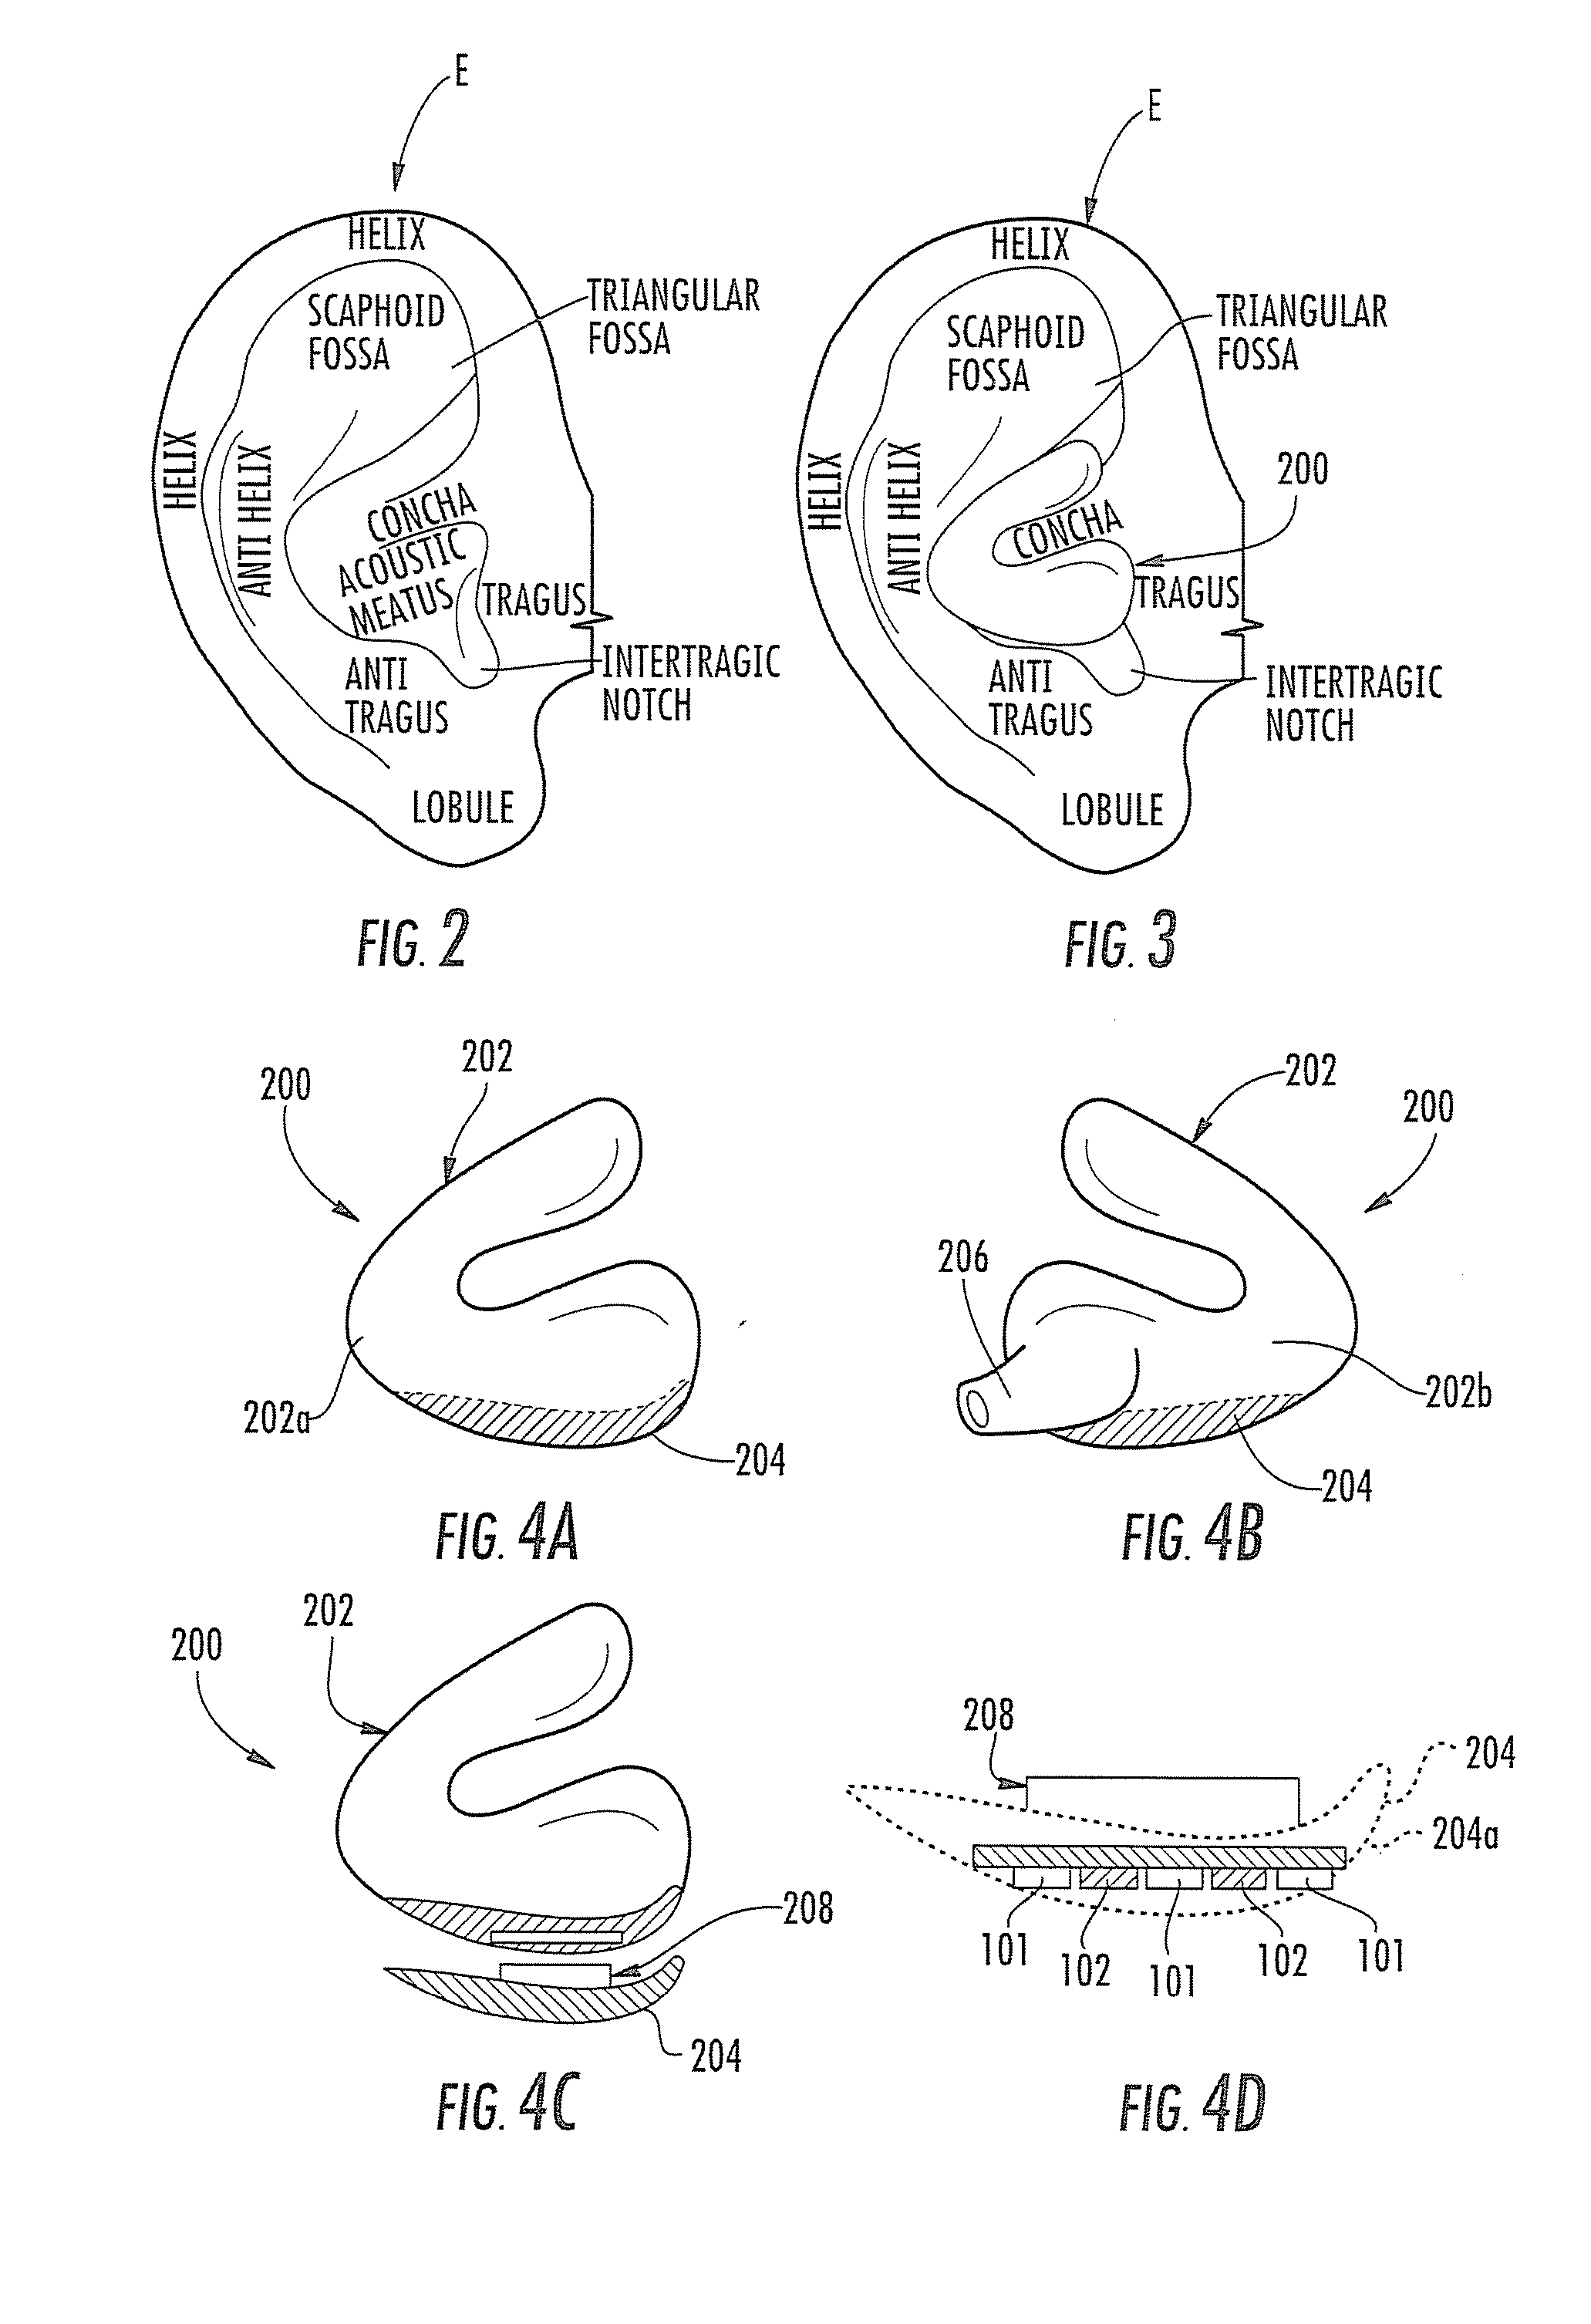 Form-Fitted Monitoring Apparatus for Health and Environmental Monitoring